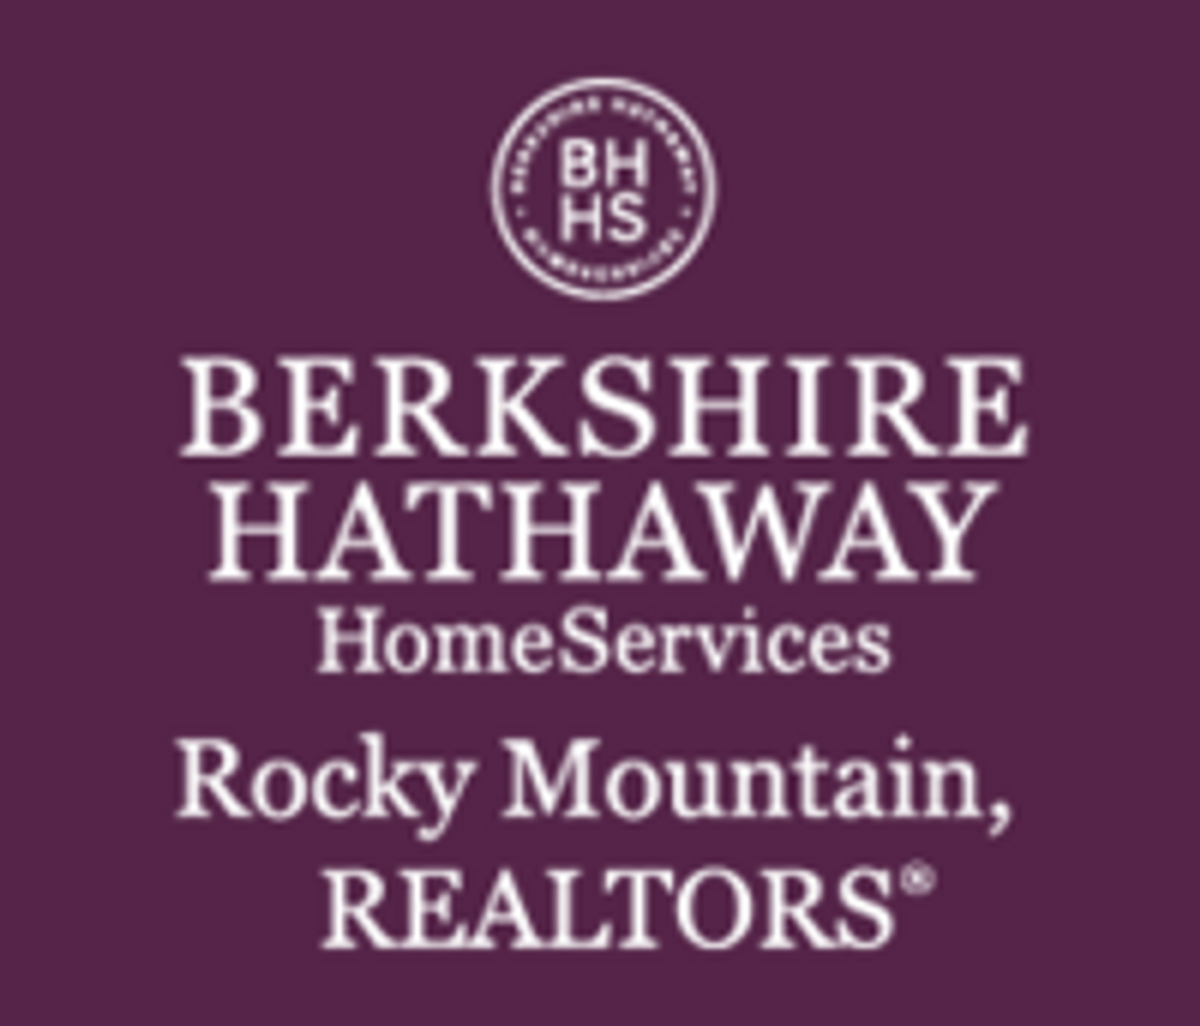 Photo for Michael Cassat, Listing Agent at Berkshire Hathaway Home Services Rocky Mountain Realtors